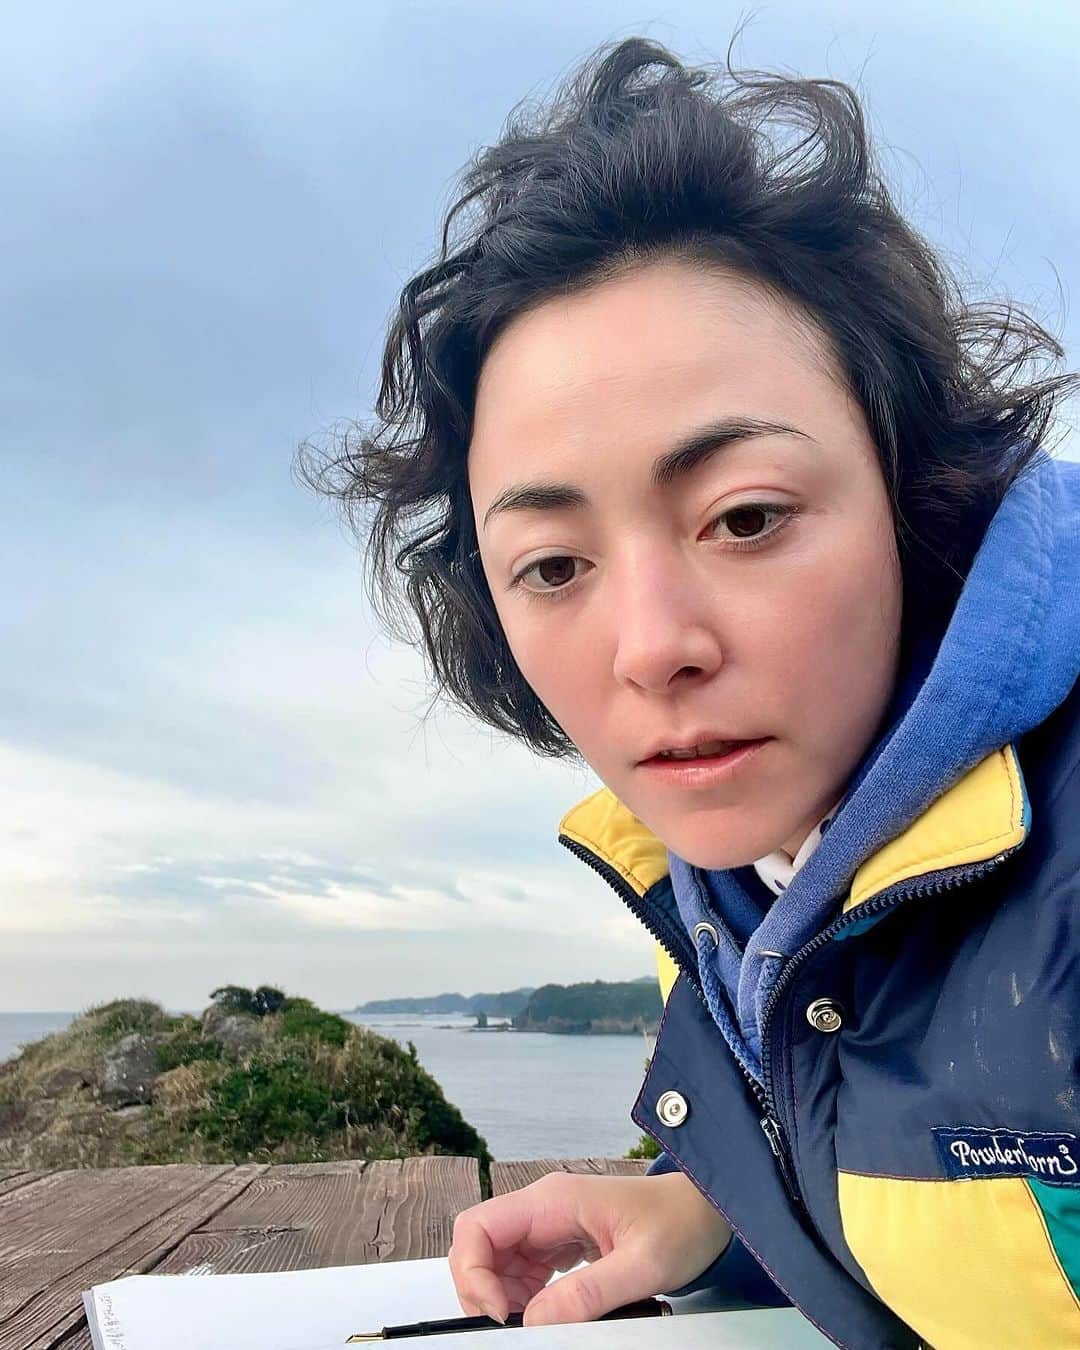 美波のインスタグラム：「Last time, I had a wonderful experience during my morning routine... I got up early, packed a picnic box and headed out for a hike. I had the pleasure of having breakfast at the top of the hill (it wasn't too high). Then I had the pleasure of starting to write my journal... It was an amazing experience to re-center myself at the top of the mountain. Then I jumped into the ocean and had a swim... it was frozen but it felt like all the molecules had woken up. what a beautiful start to the day 😍 The more we observe nature, the more we can refocus. The more you melt into nature, the more every little bullshit in life starts to turn into nothing at all. I think I really need to feel more nature on those days.  この前、朝の日課で素敵な体験をした。 早起きして、ピクニック用のご飯を作り、ハイキングに出かけた。丘の頂上で朝食をとり（それほど高くはない）、それから日記を書き始めた。山の頂上で自分を見つめ直すことって今まで中々なかったから本当にいい経験だった。 それから海に飛び込んで泳いで...凍ったけど、すべての分子が目覚めたような感じがした。美しい一日の始まりだった。 自然を観察すればするほど、自分の軸とコネクトできる。 自然の中に溶け込めば溶け込むほど、人生における些細な戯言が何でもなくなる。 もっと自然を感じたいと思う今日この頃です。」